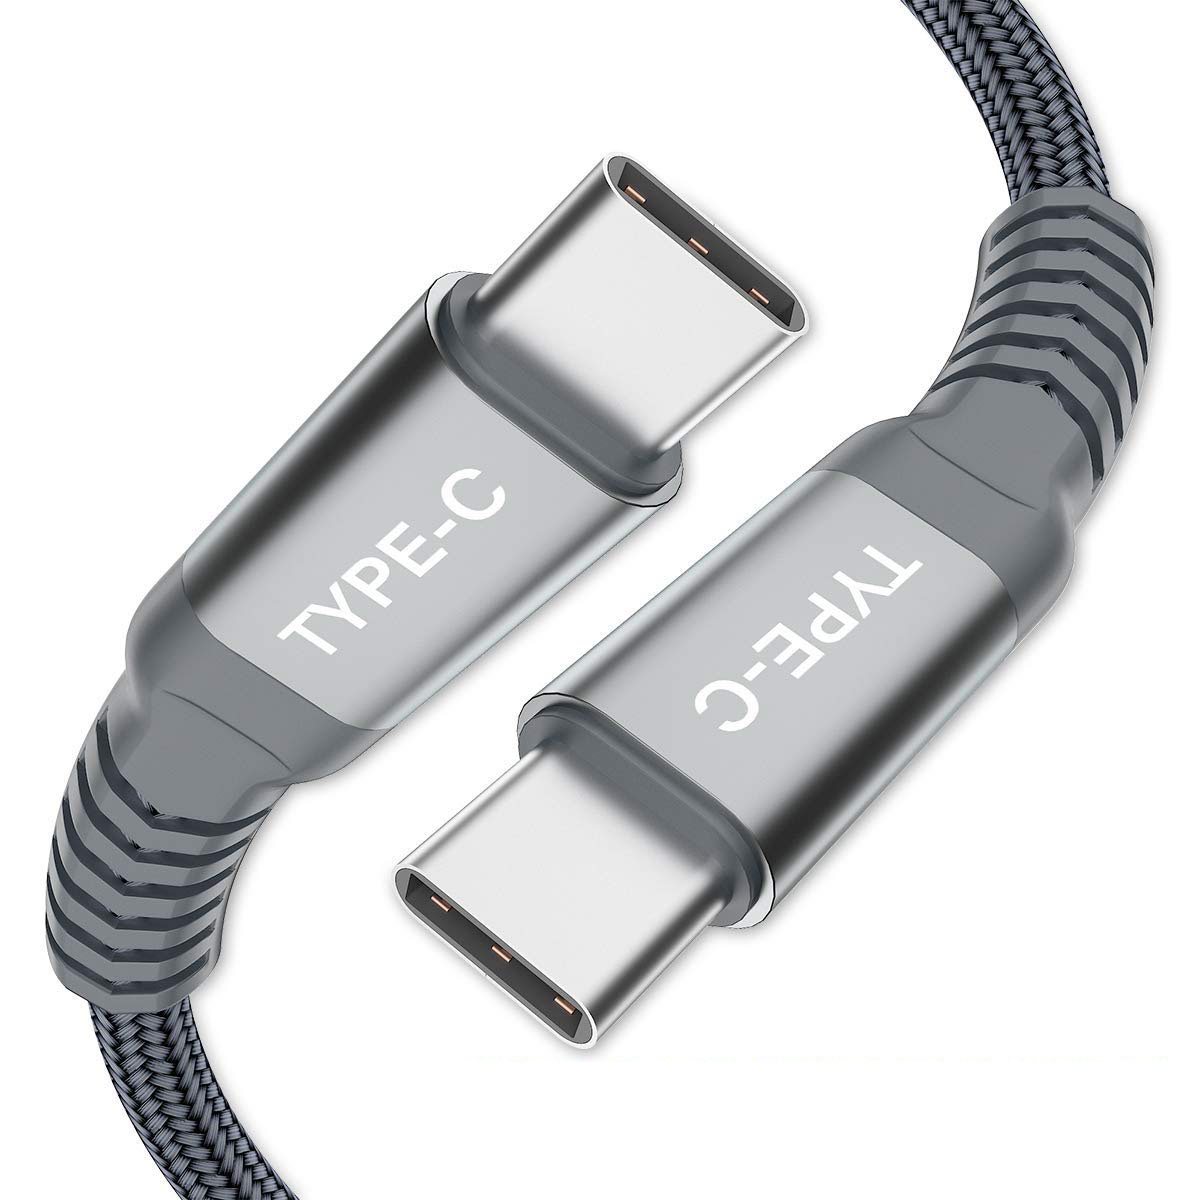 USB C TO USB C Cable-grey